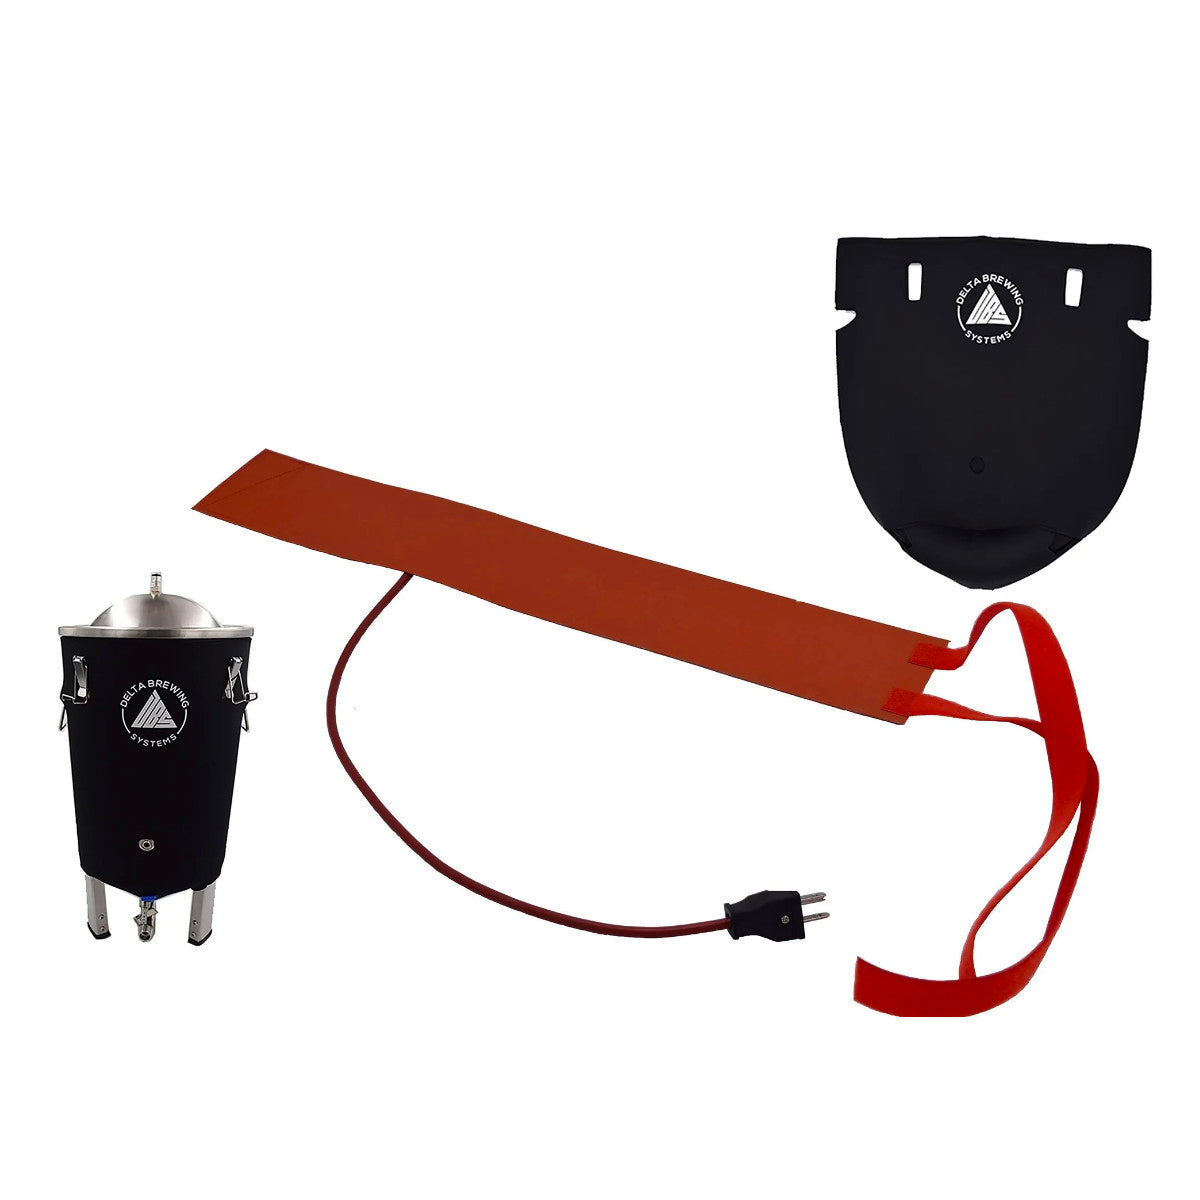 fermenter insulating and heating kit